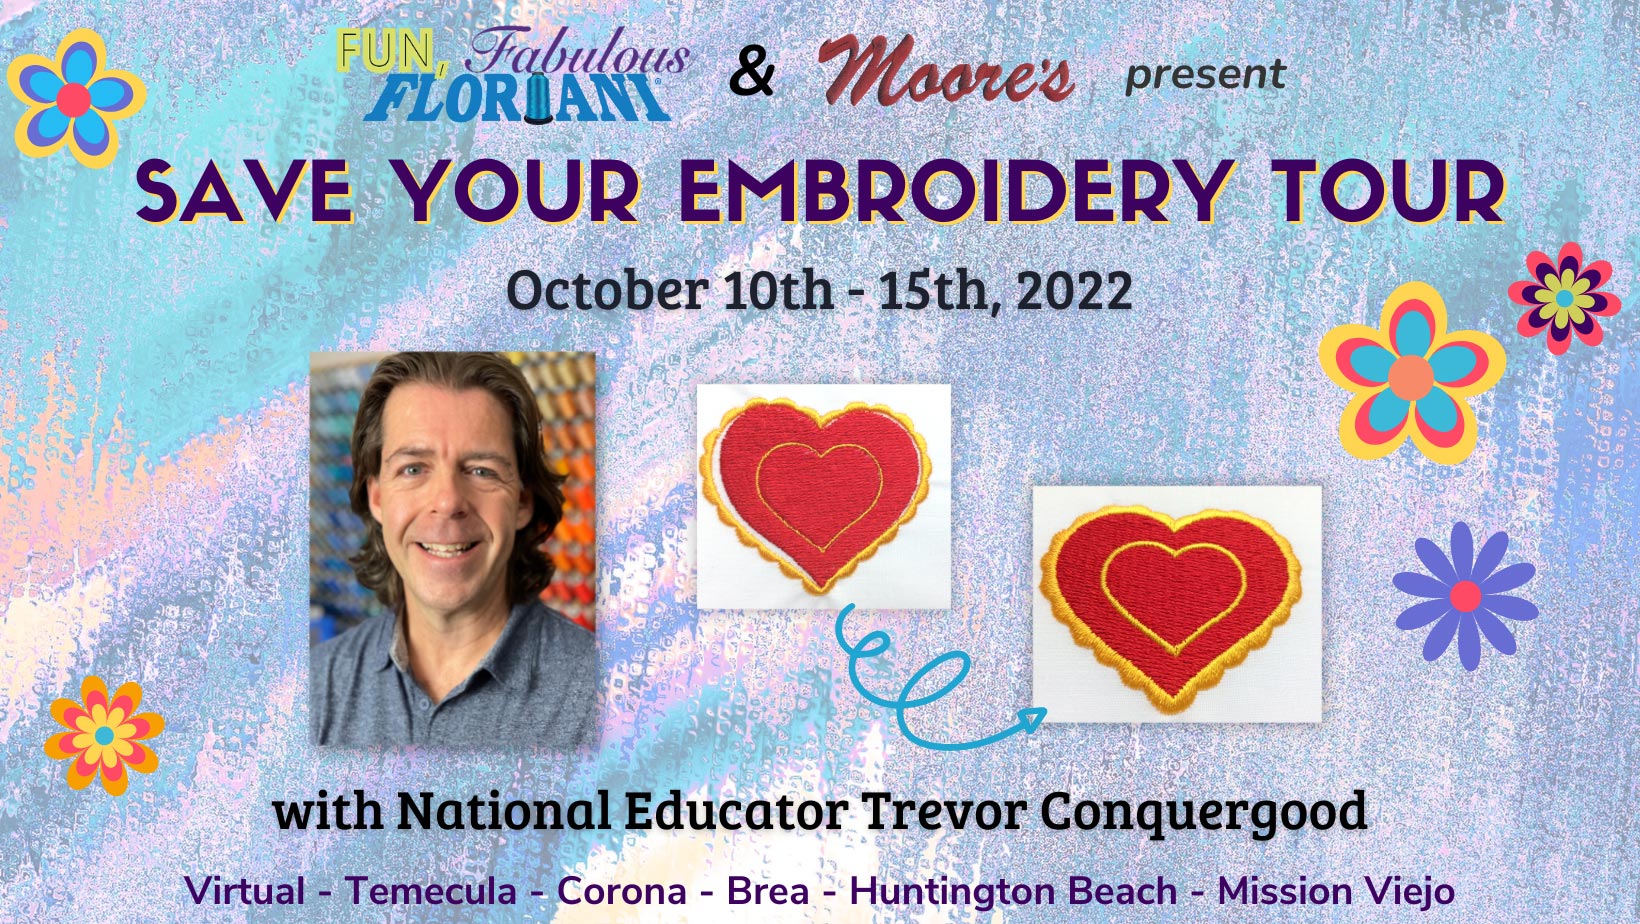 Save Your Embroidery Tour event home page banner